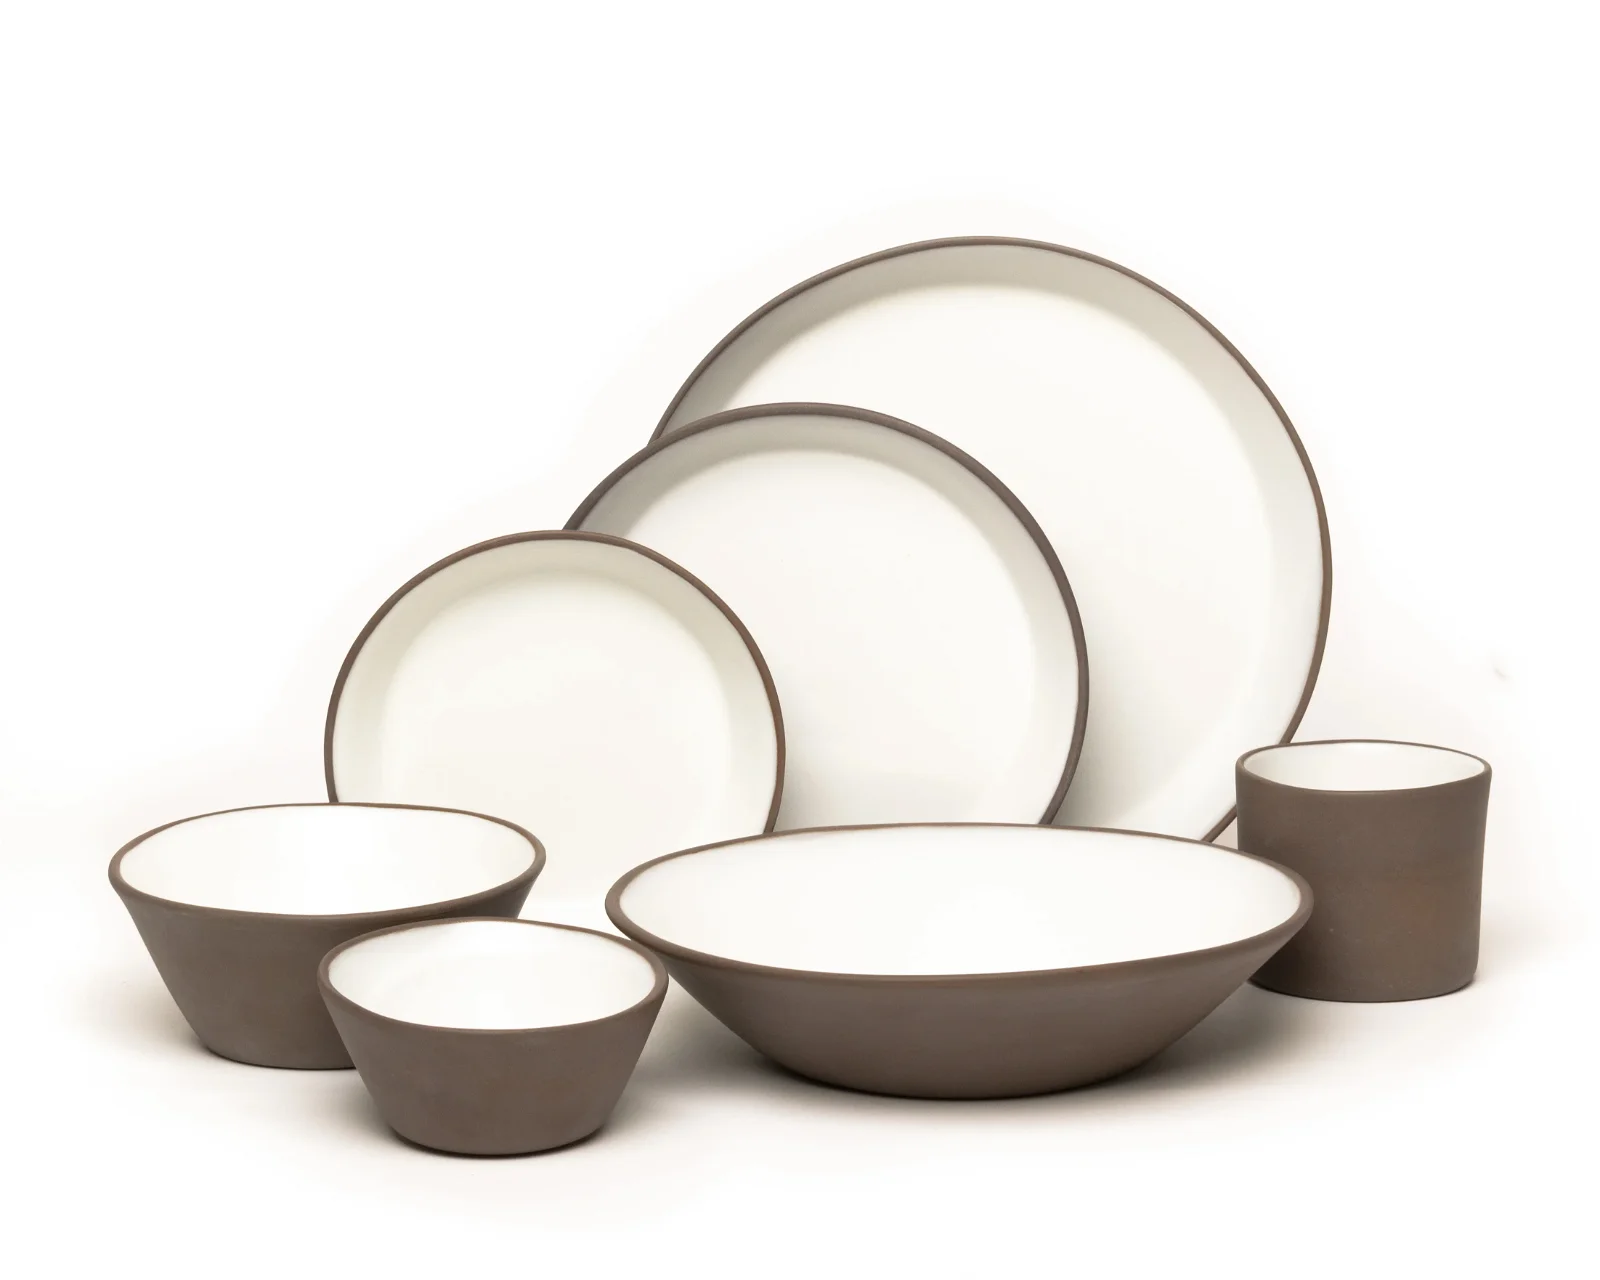 Image of 7 Piece Skali Coupe Dinner Setting